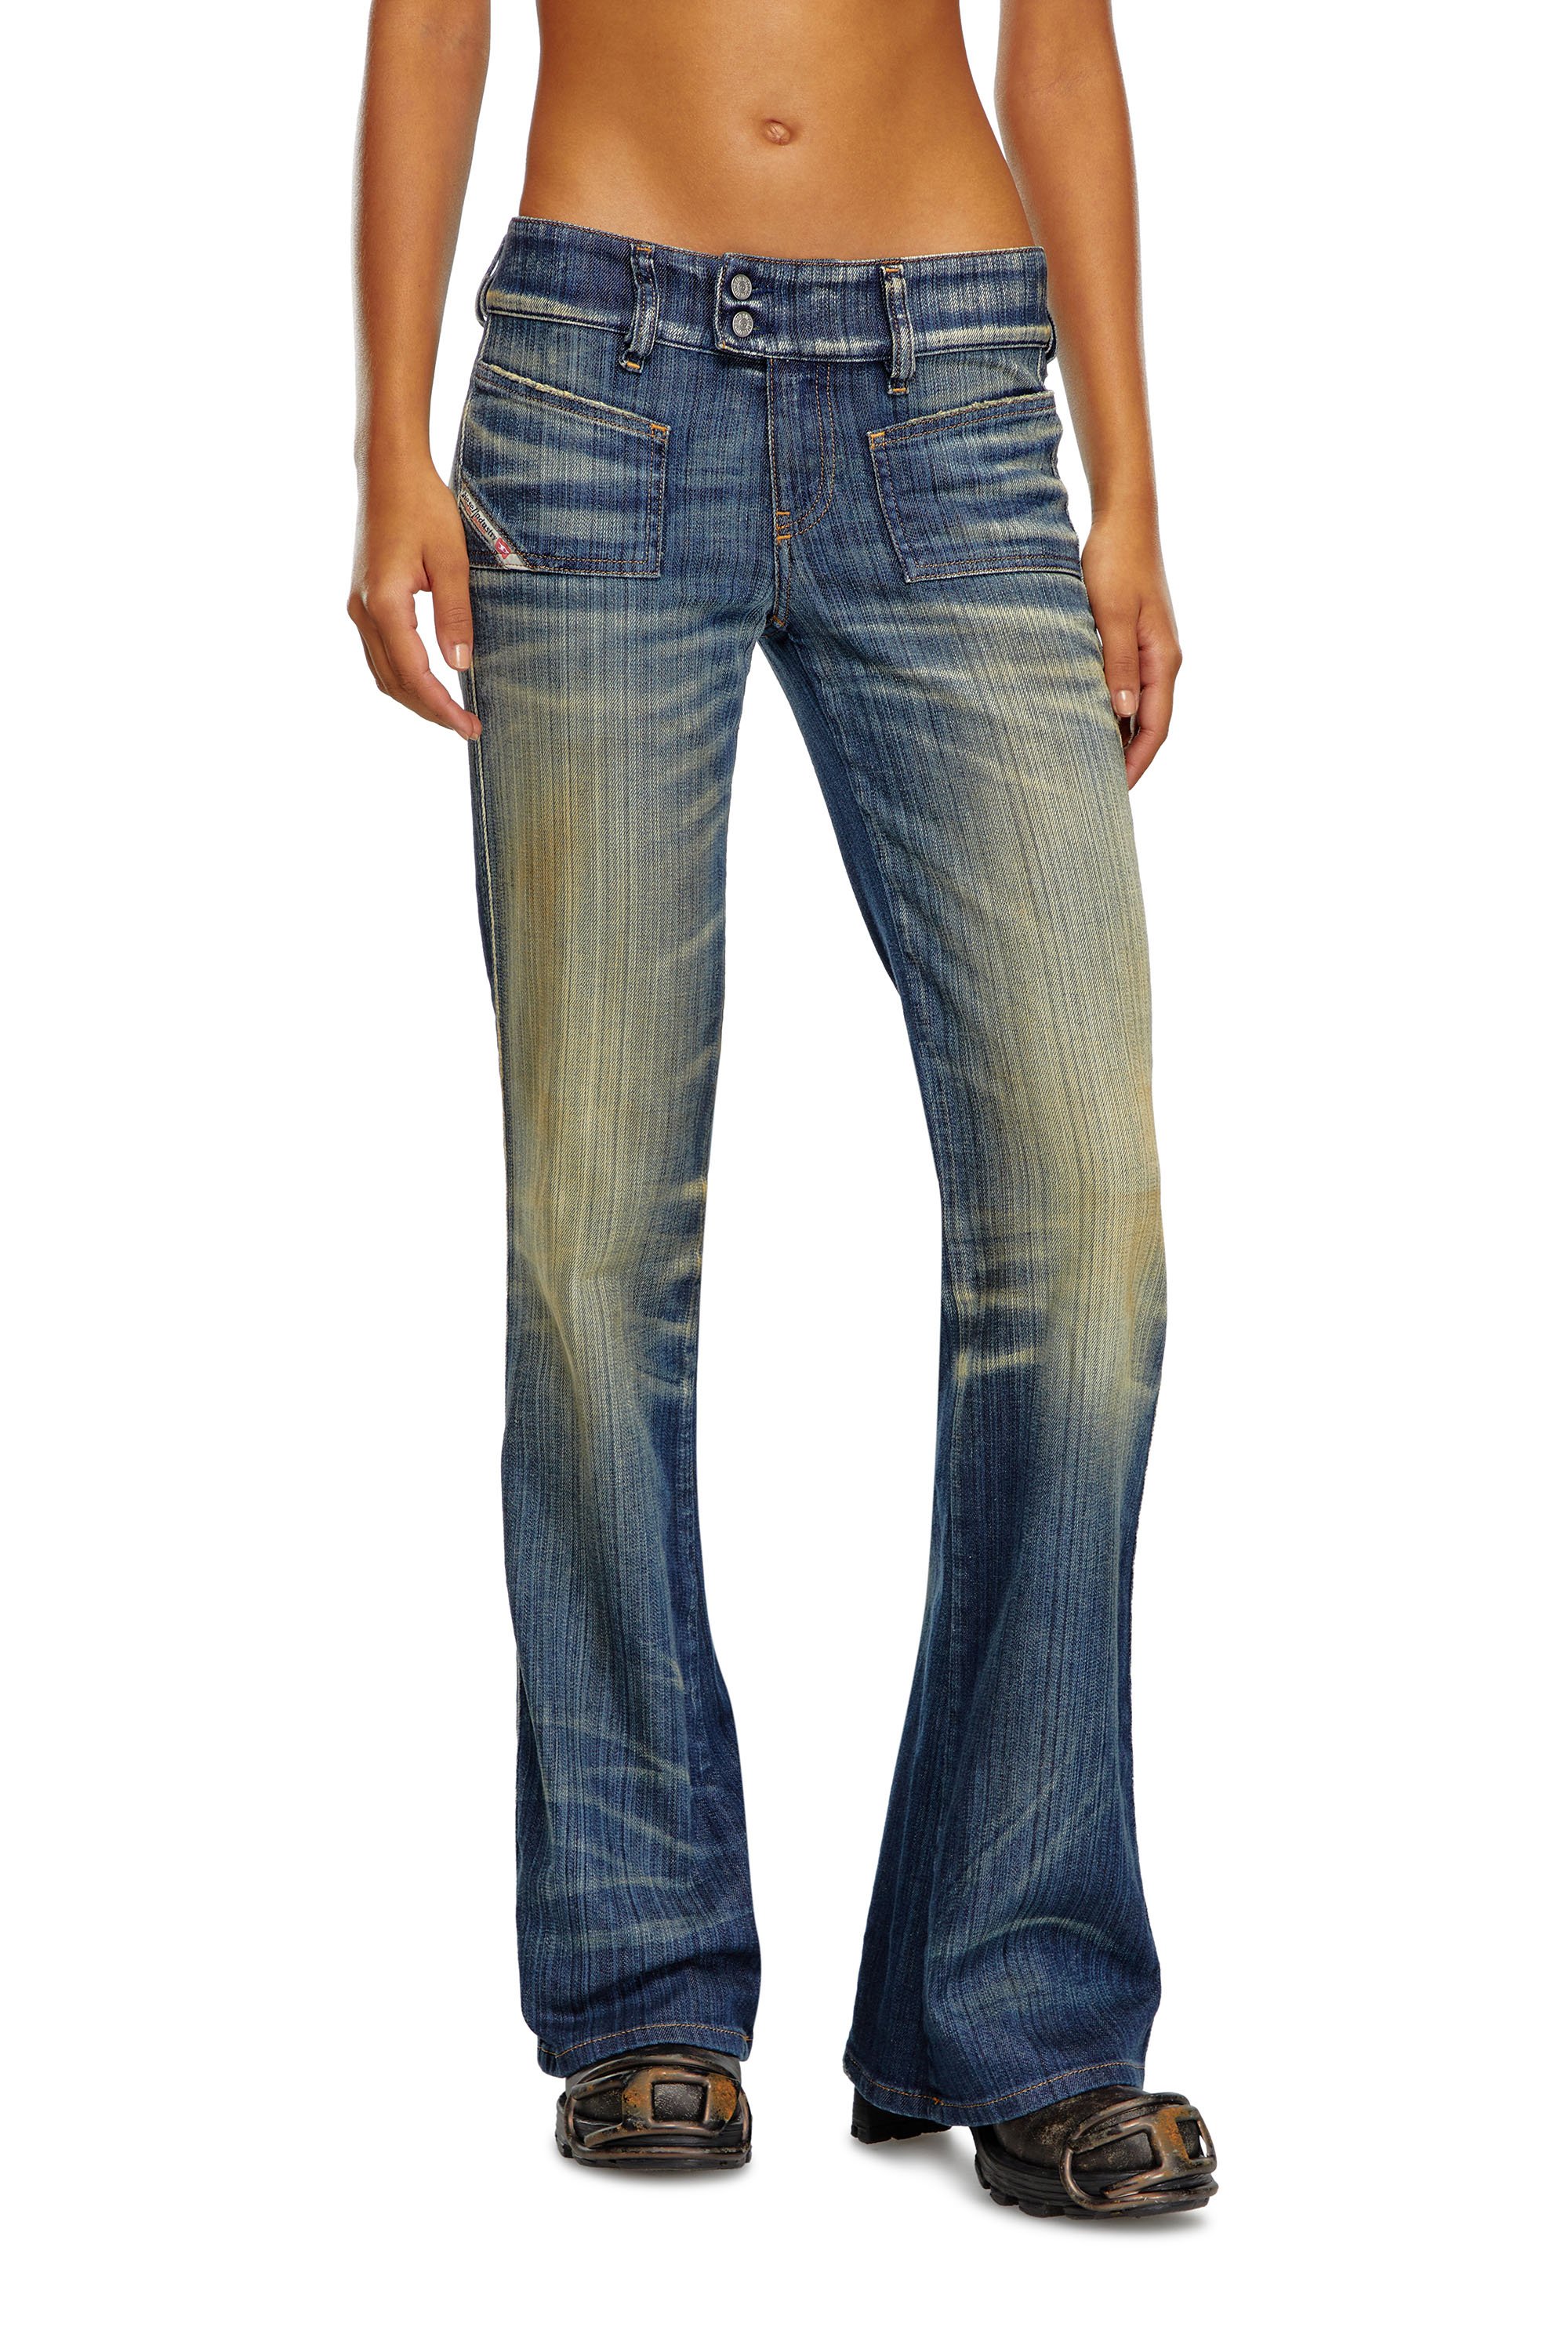 Diesel - Bootcut and Flare Jeans D-Hush 09J46, Mujer Bootcut y Flare Jeans - D-Hush in Azul marino - Image 1